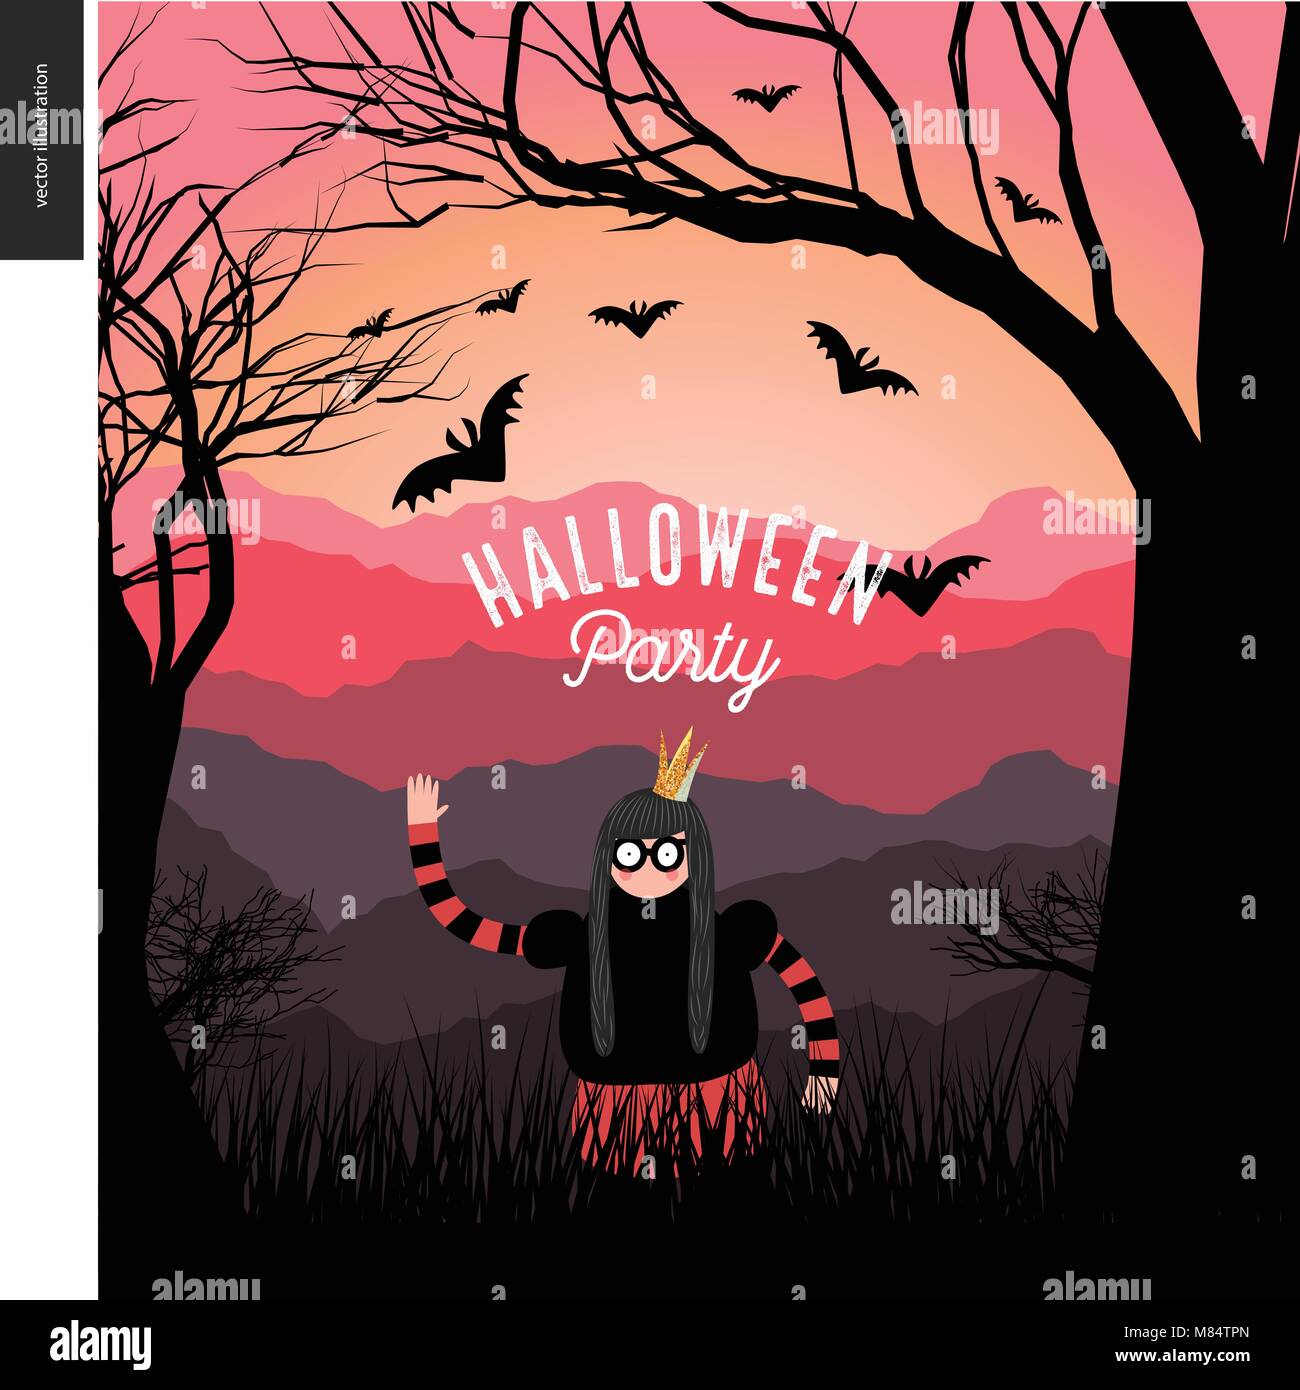 Halloween Party illustrated poster. Vector cartoon illustration of a forest landscape with a girl wearing a halloween costume with a crown, and flying Stock Vector